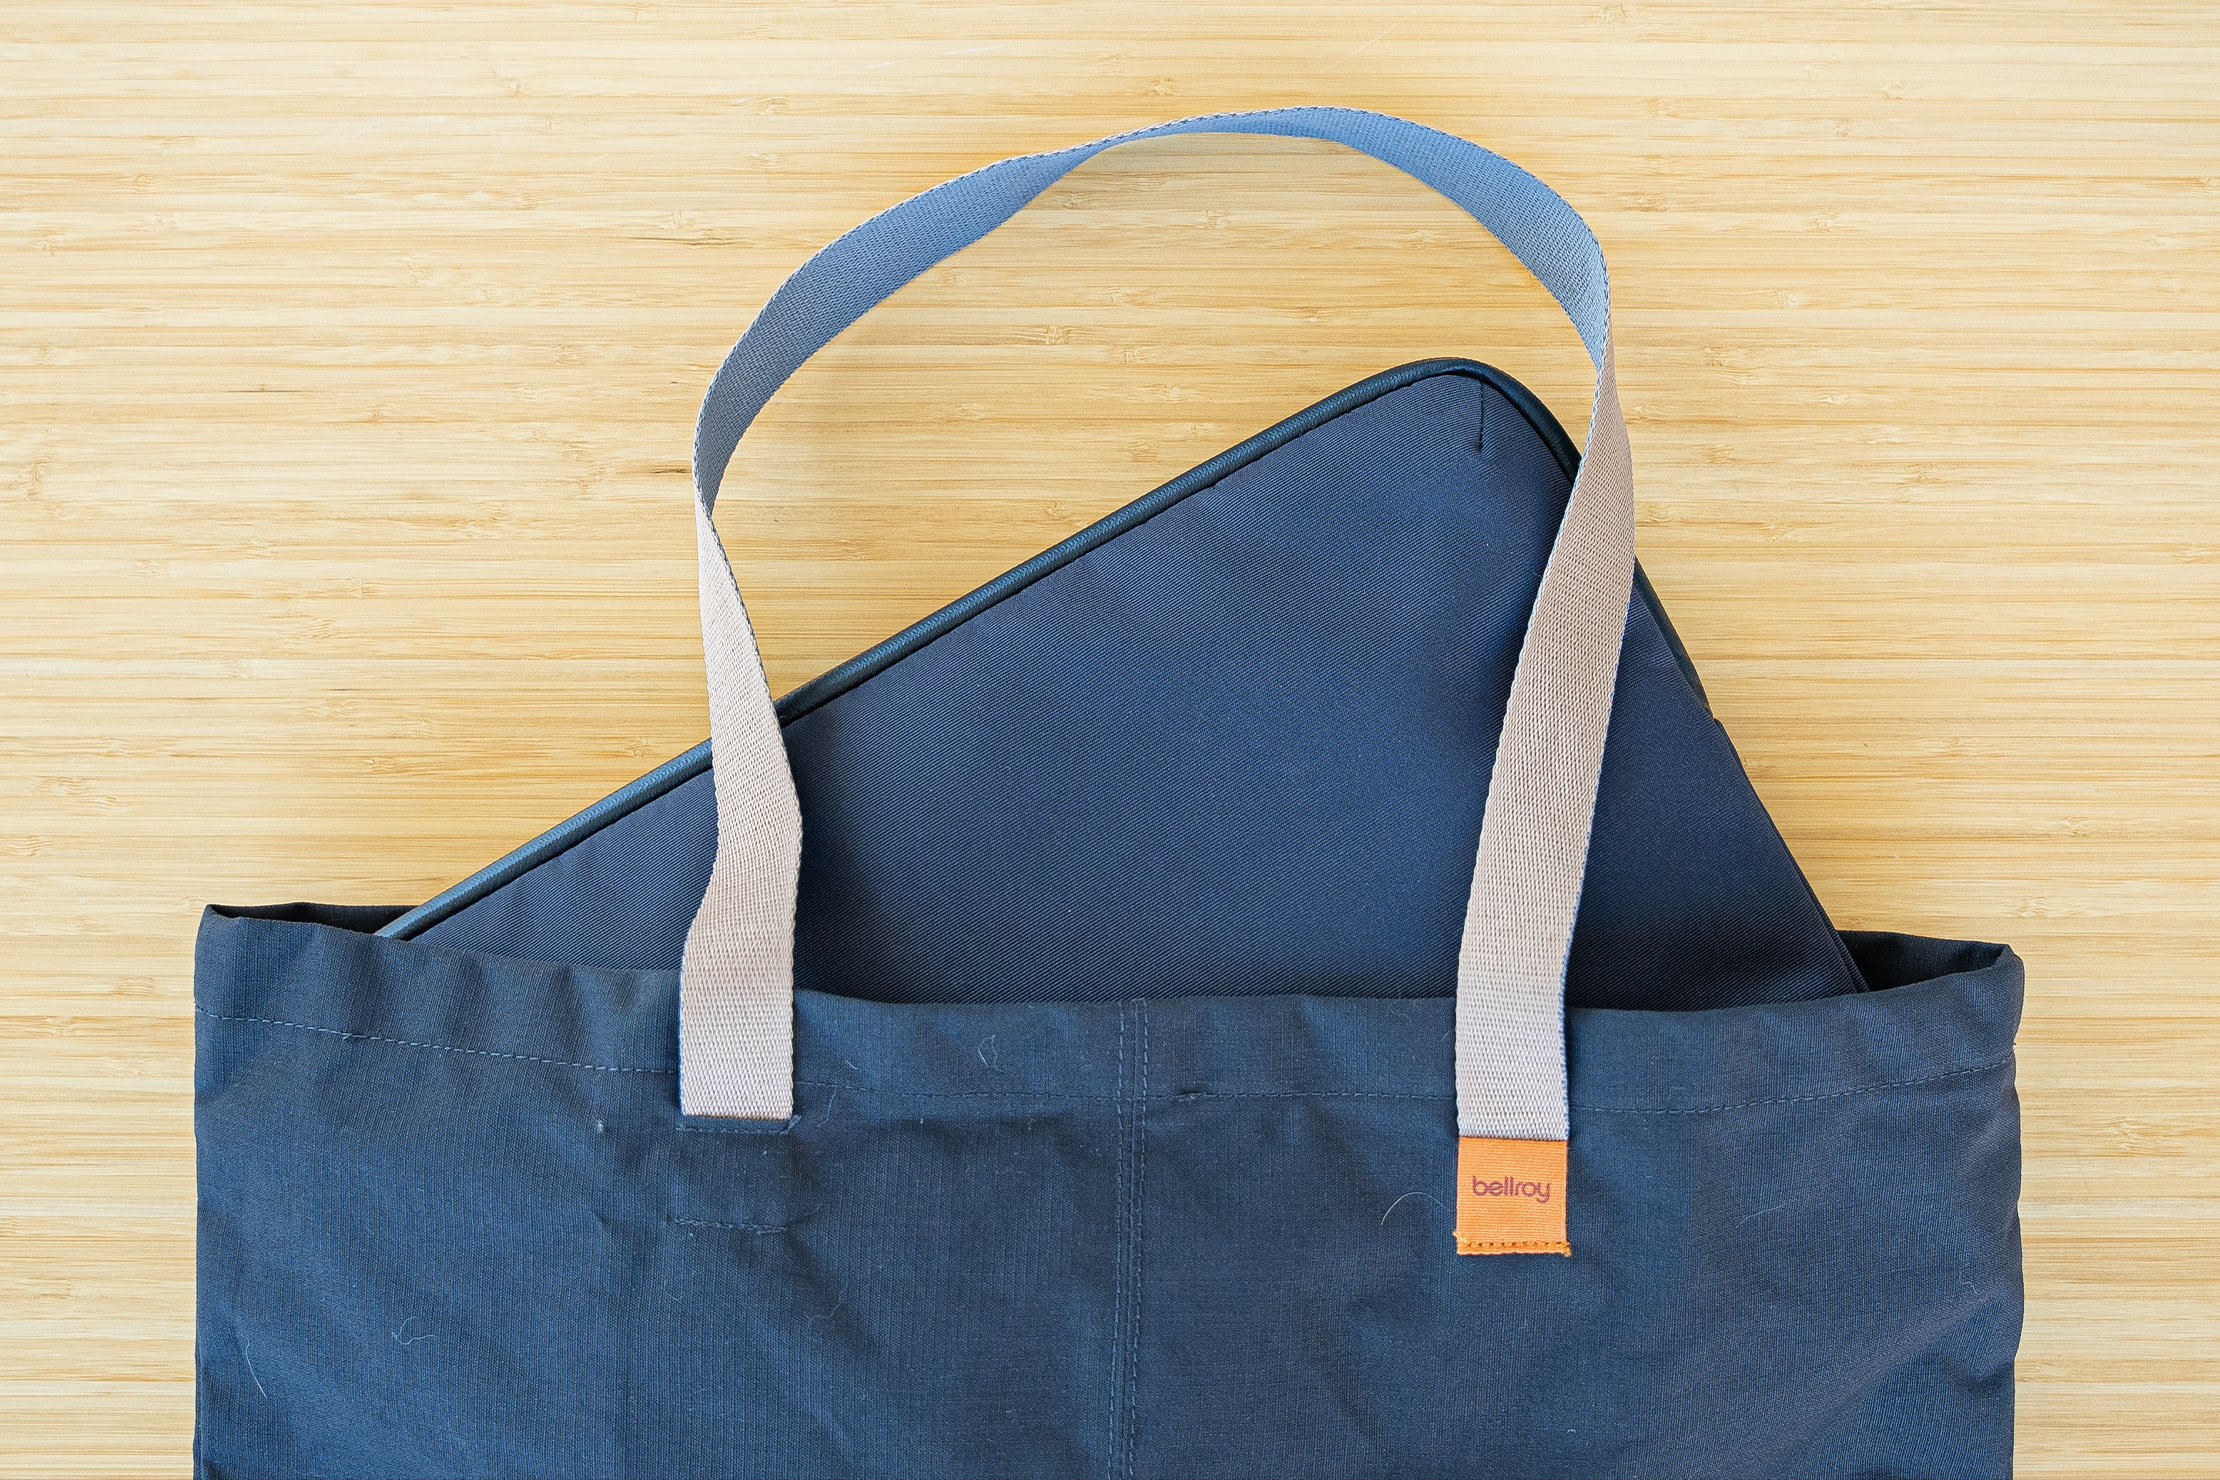 Bellroy Laptop Caddy Inside Tote